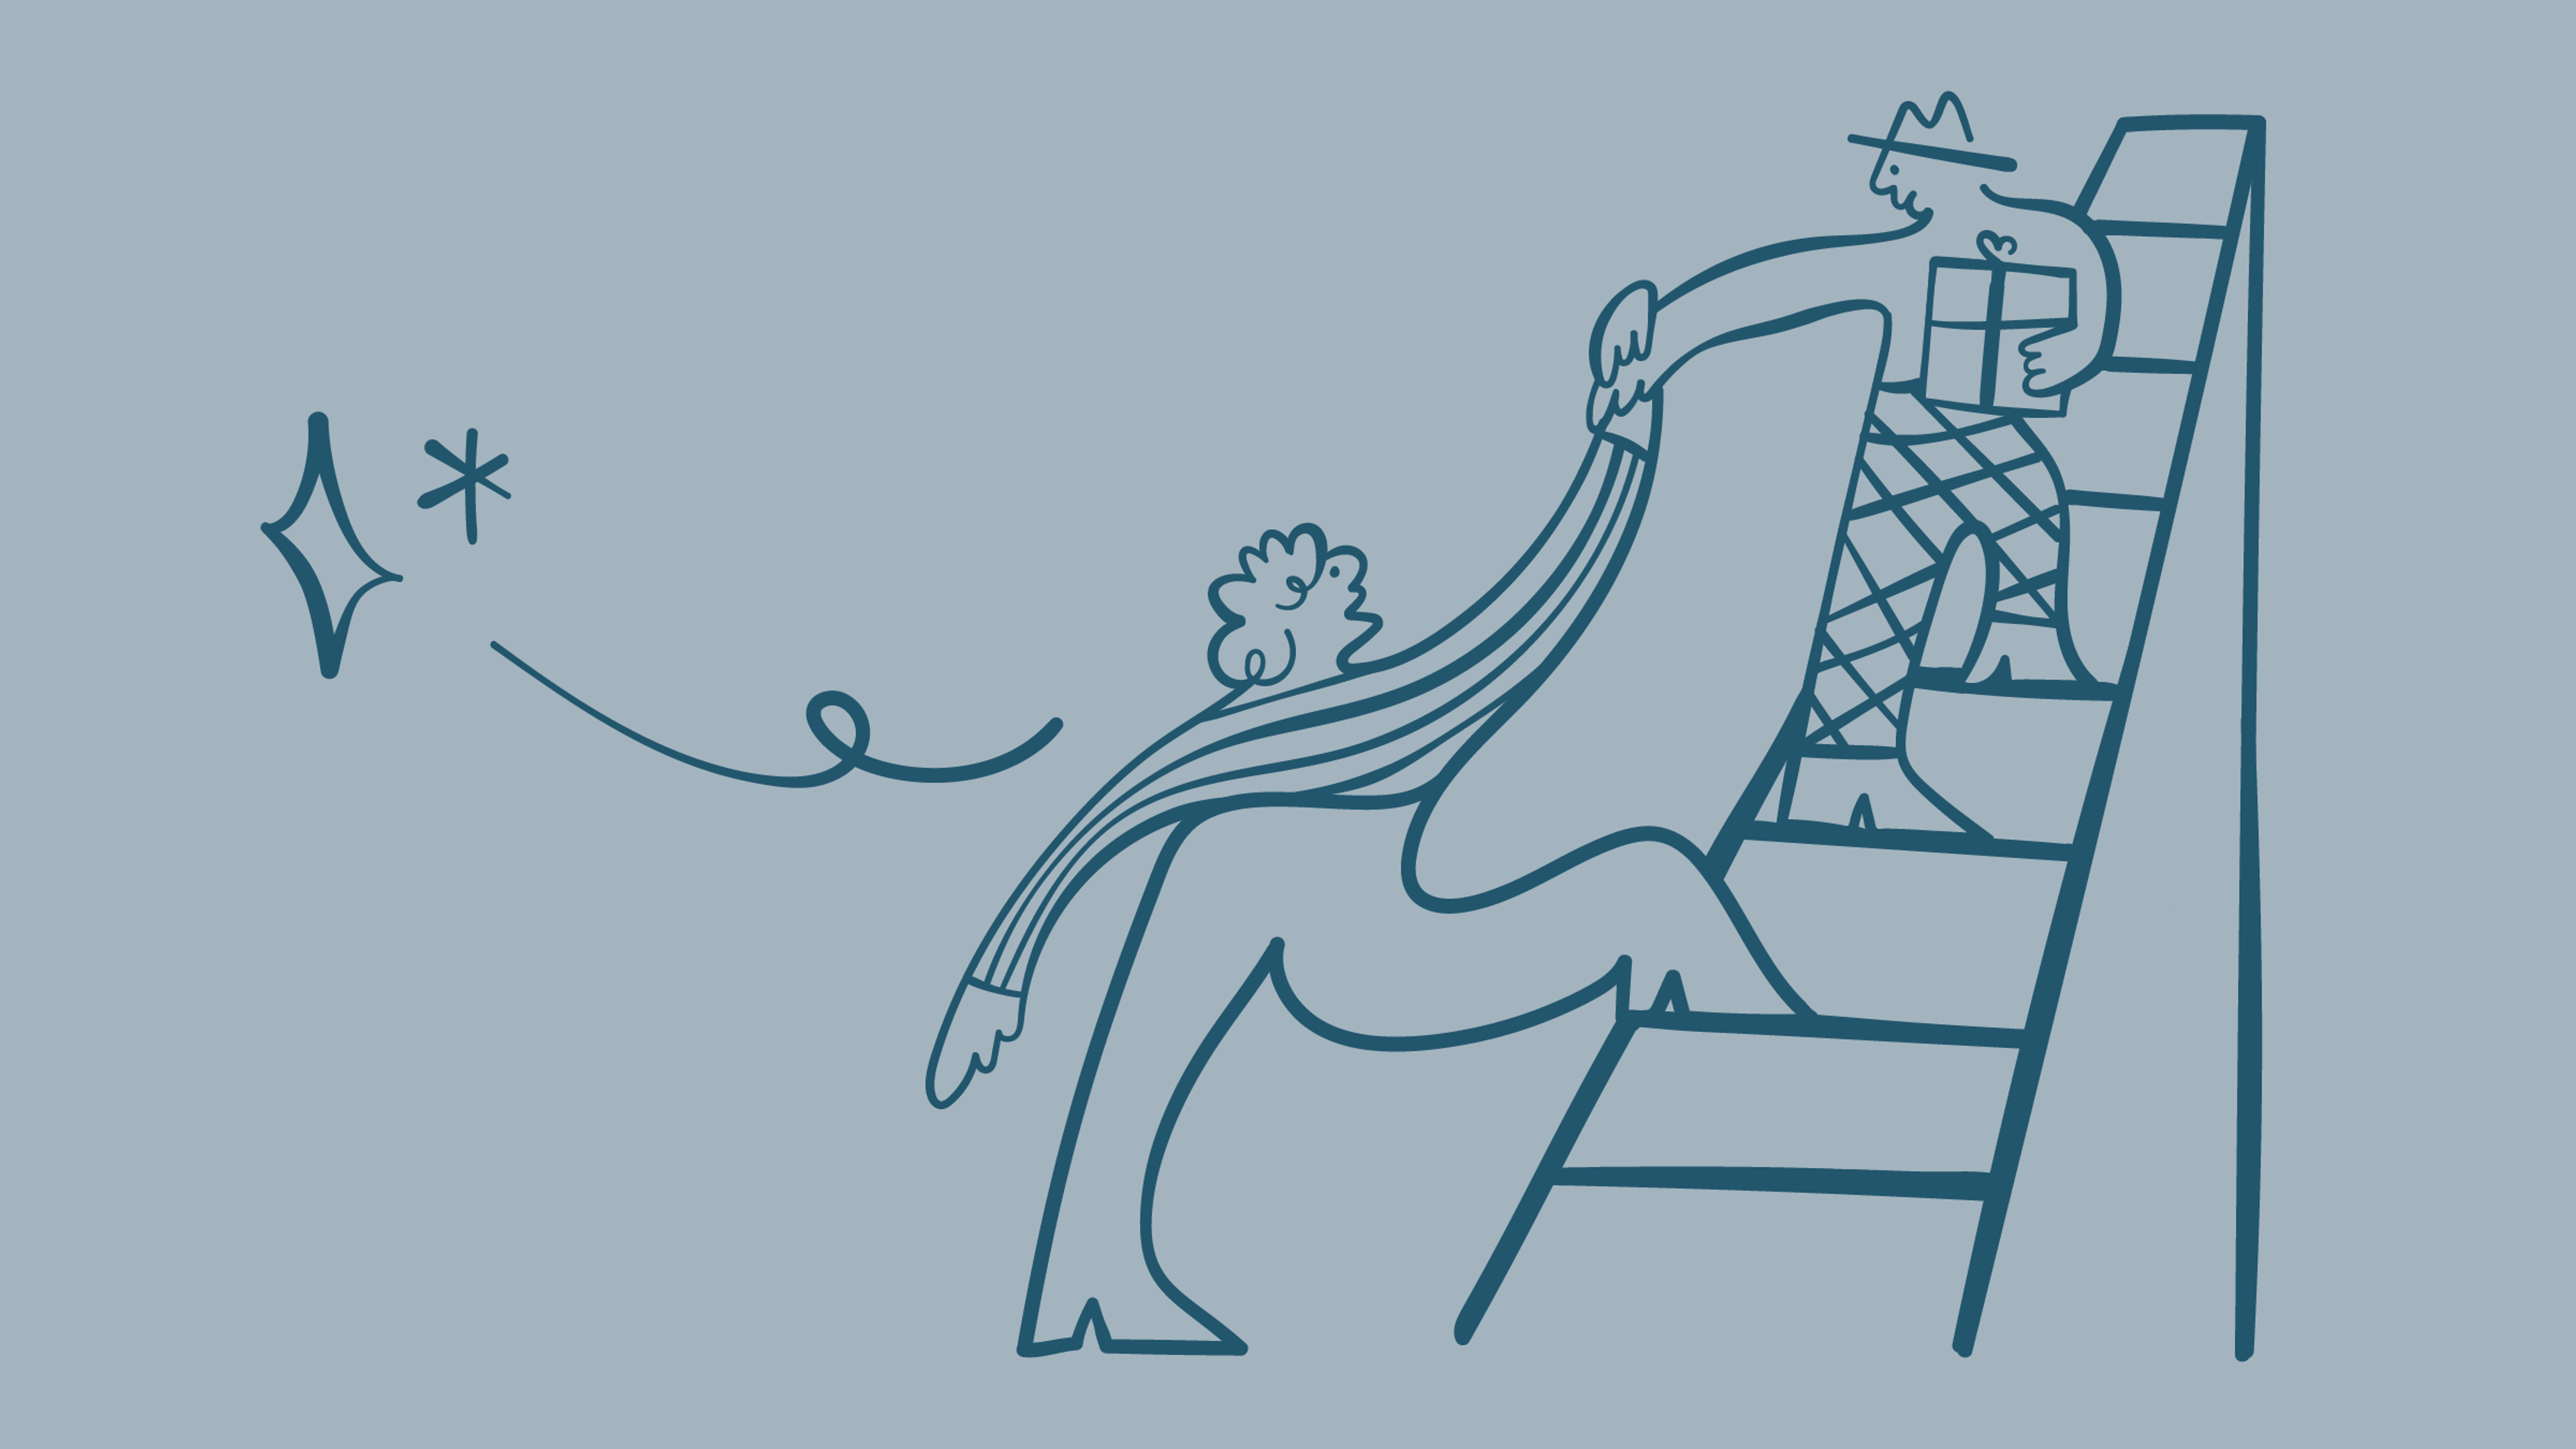 An illustration showing a figure helping another figure up the ladder of B2B growth through gifting.